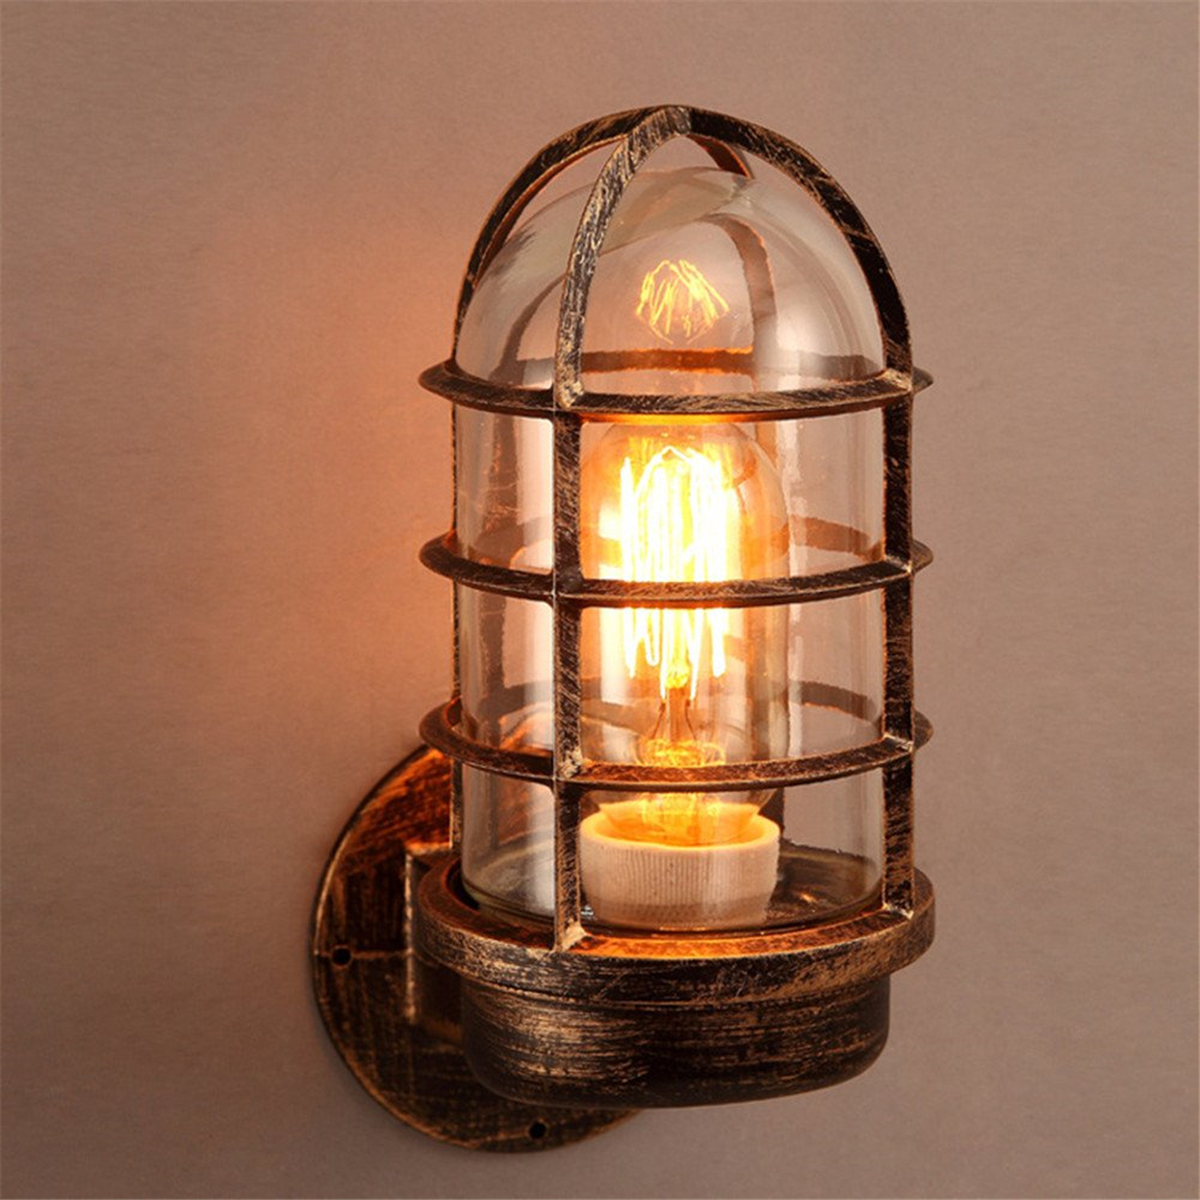 Vintage-Industrial-Unique-Wall-Lamp-Iron-Rustic-Copper-Steampunk-Lamp-Sconce-1635620-1